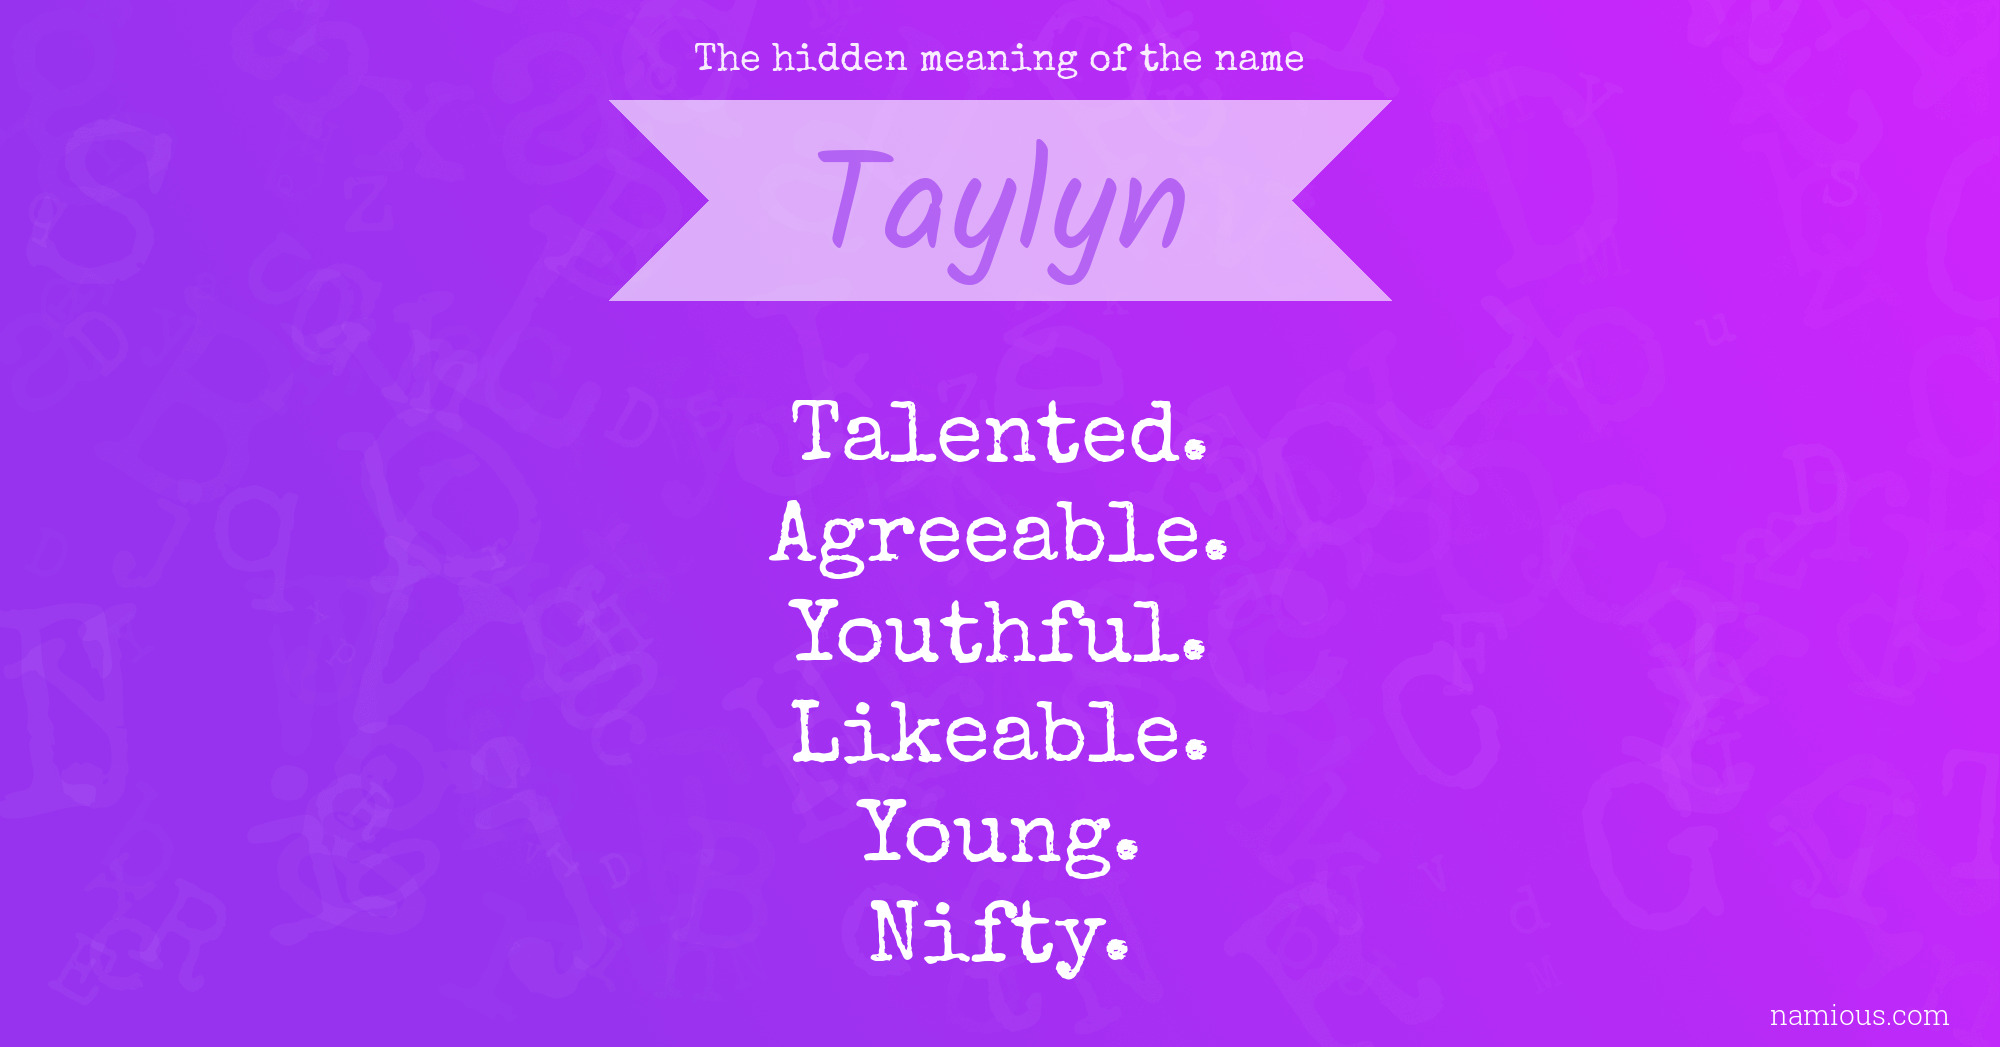 The hidden meaning of the name Taylyn